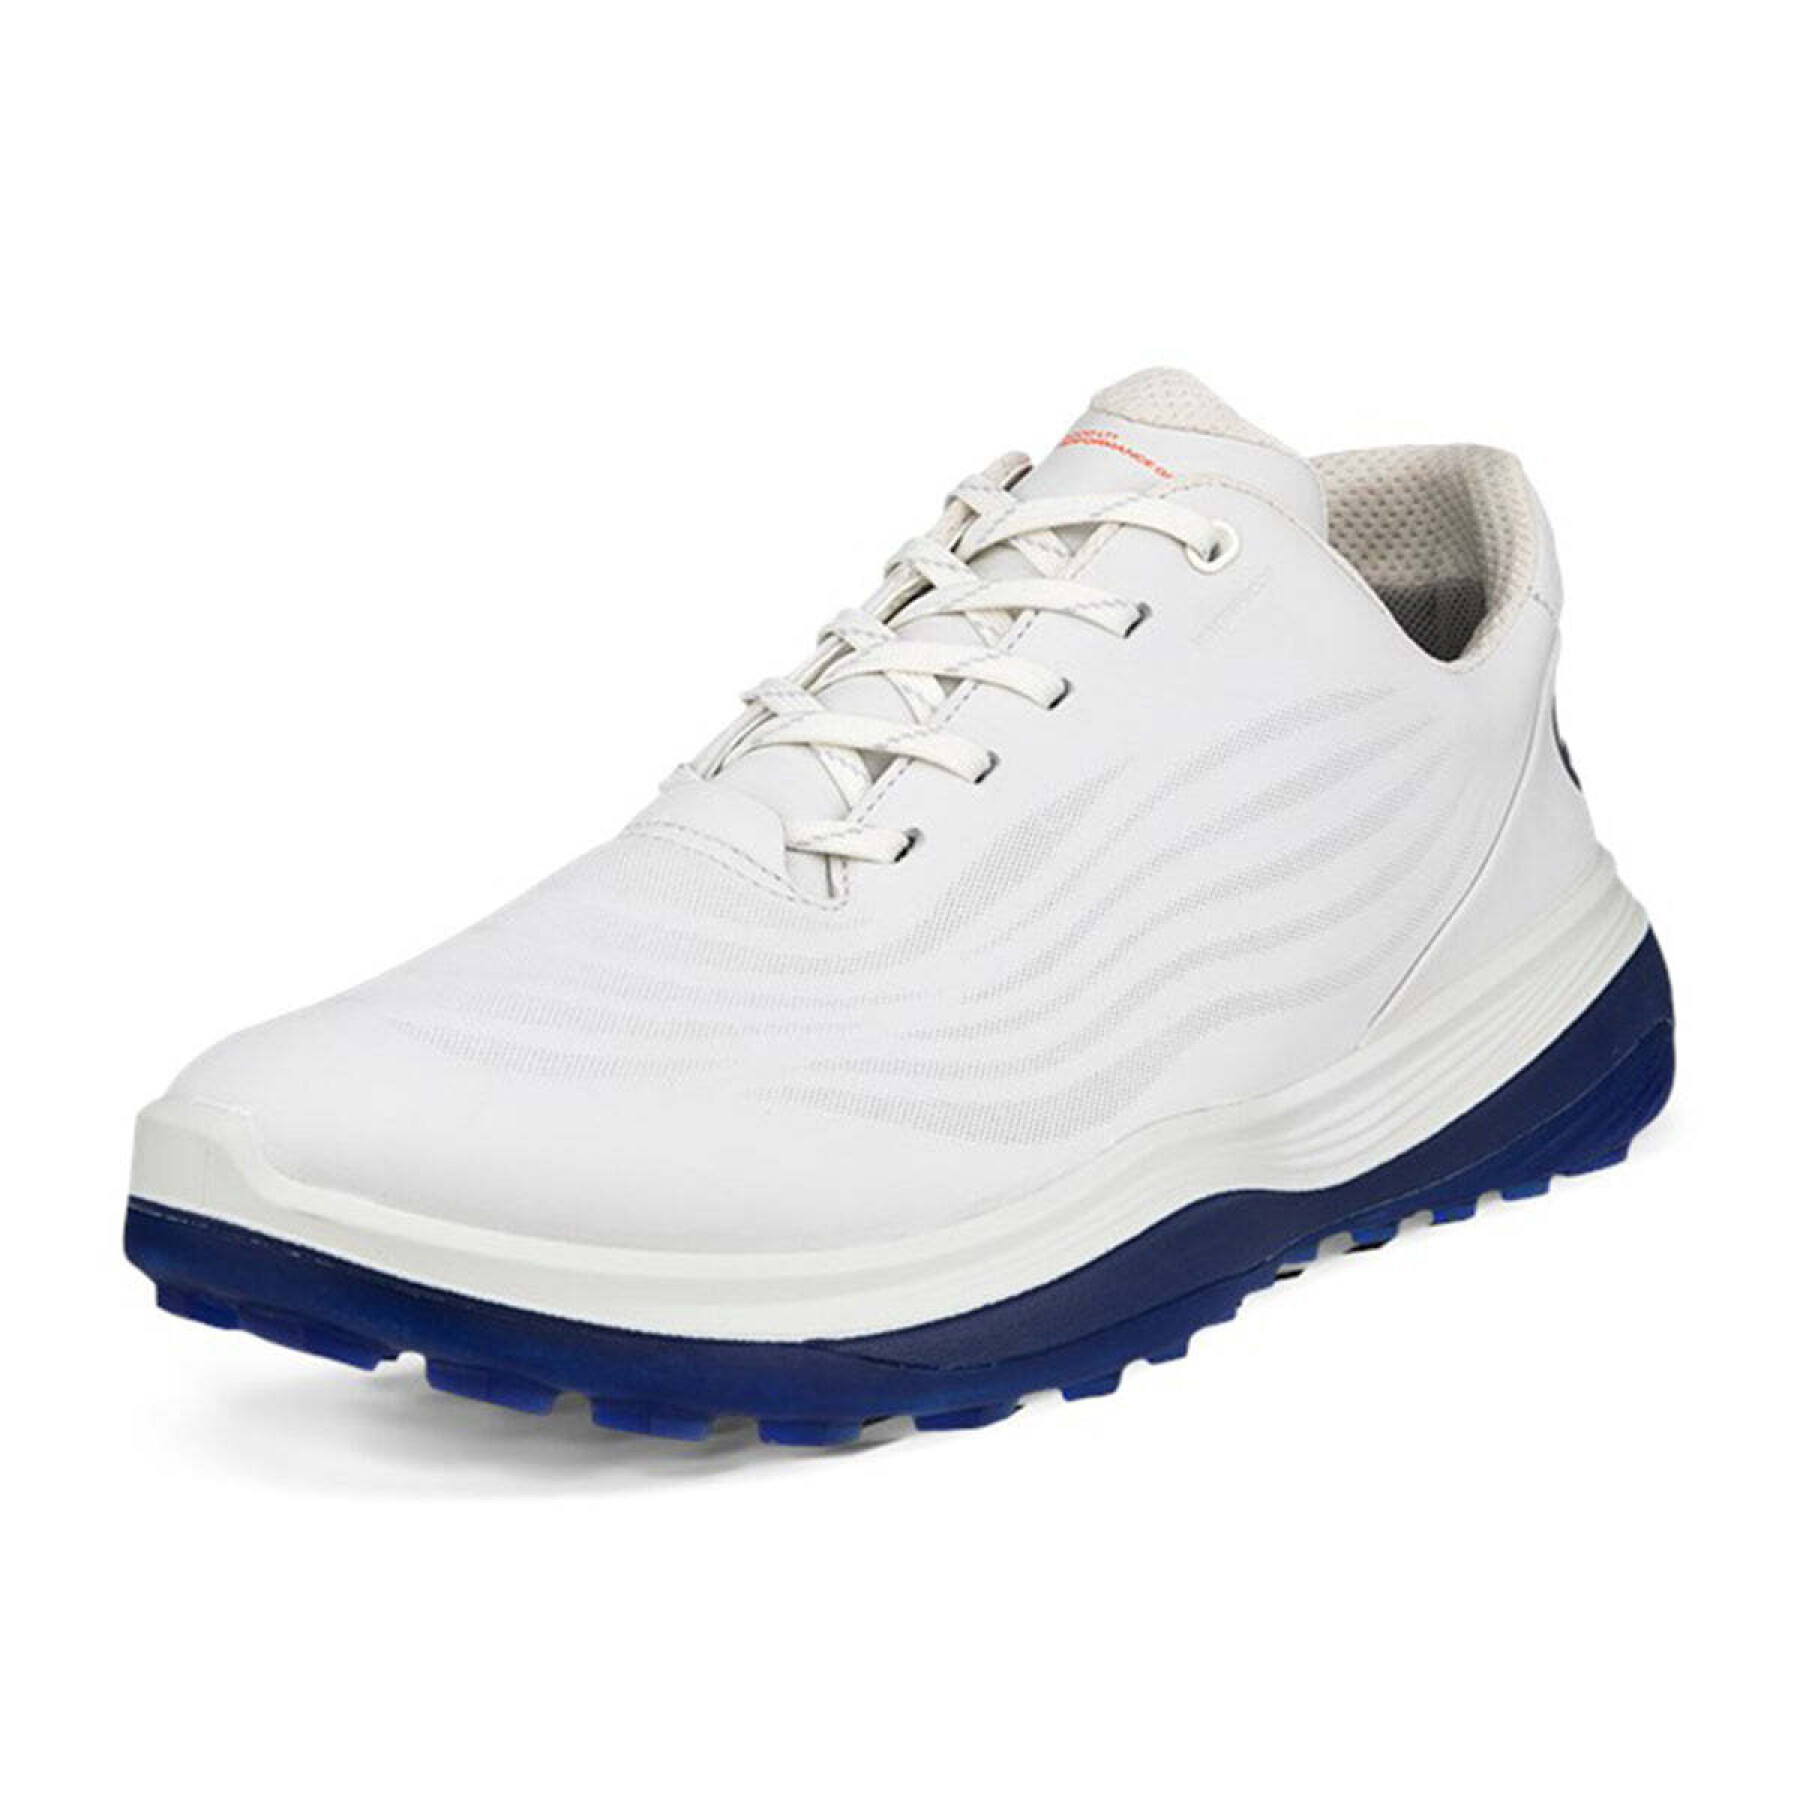 Waterproof leather spikeless golf shoes Ecco LT1